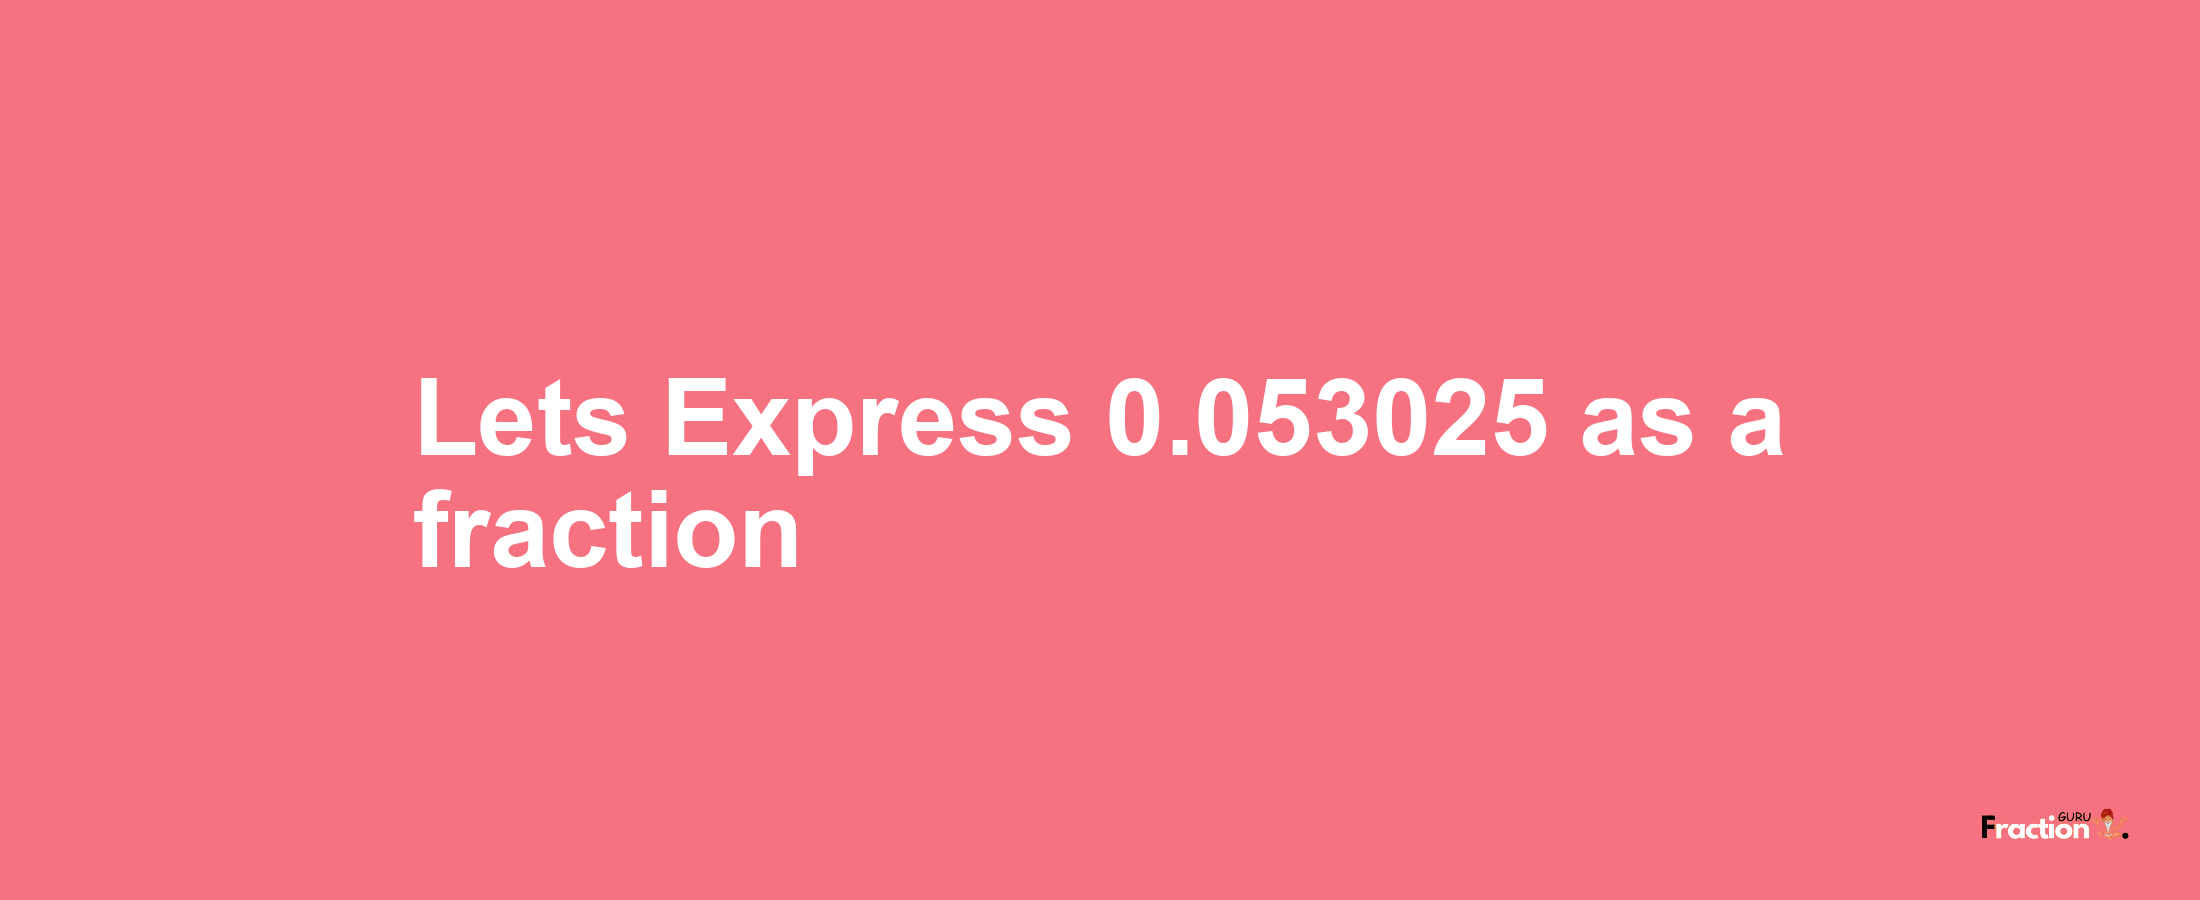 Lets Express 0.053025 as afraction